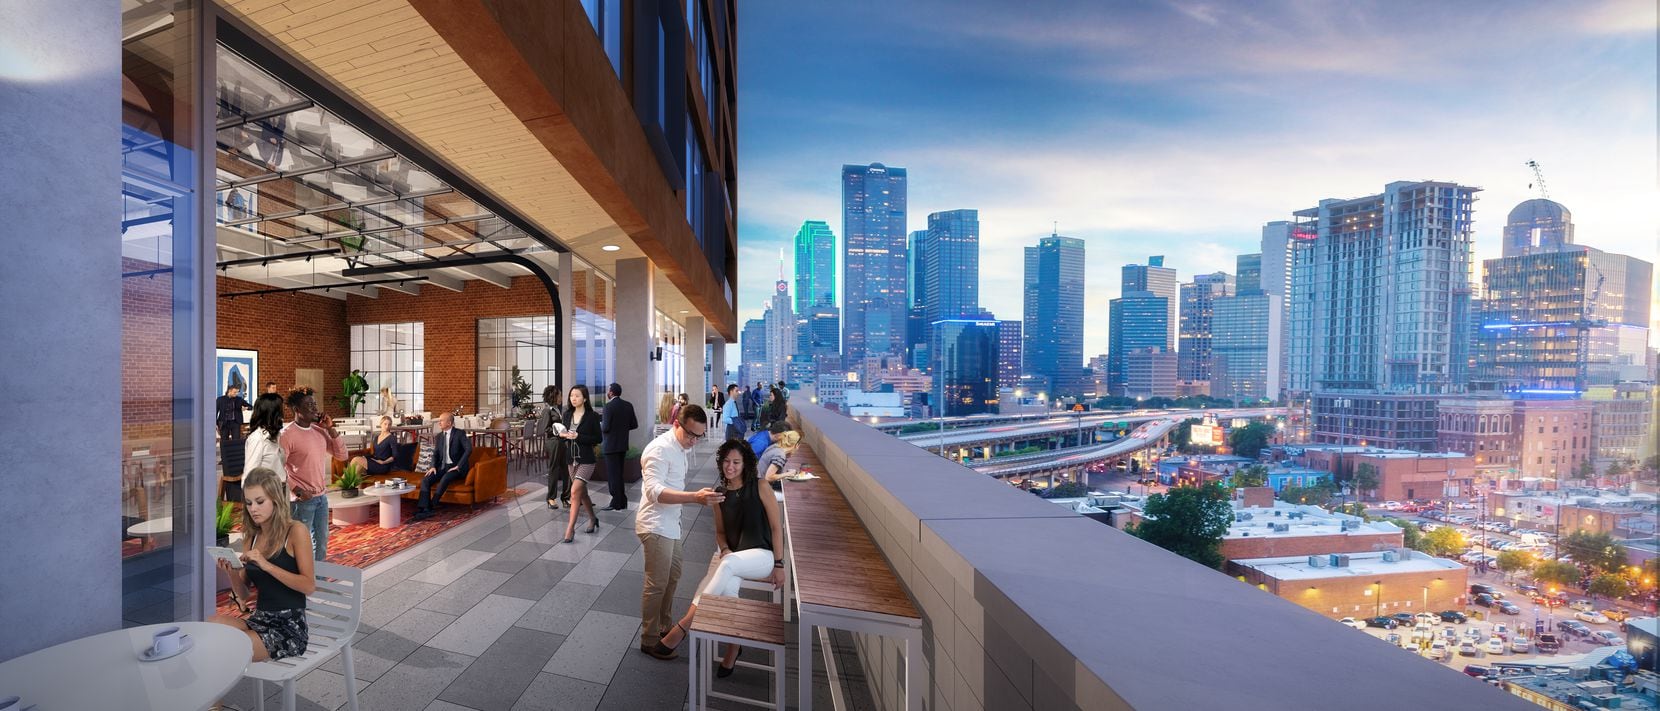 An upper floor terrace in the building overlooks downtown Dallas.